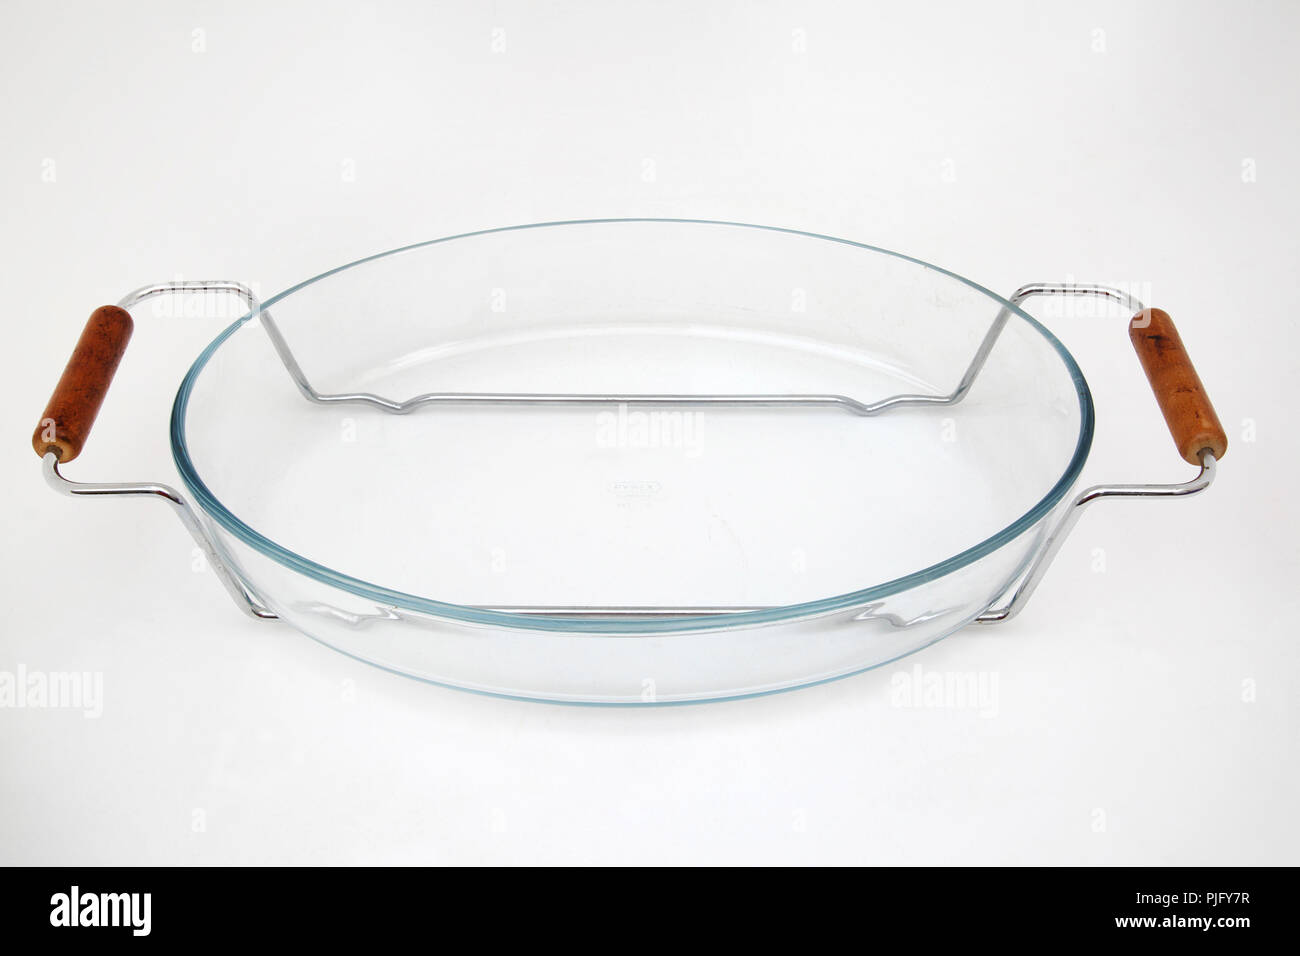 Pyrex Oven Dish with Stainless Steel and Wood Handles Stock Photo